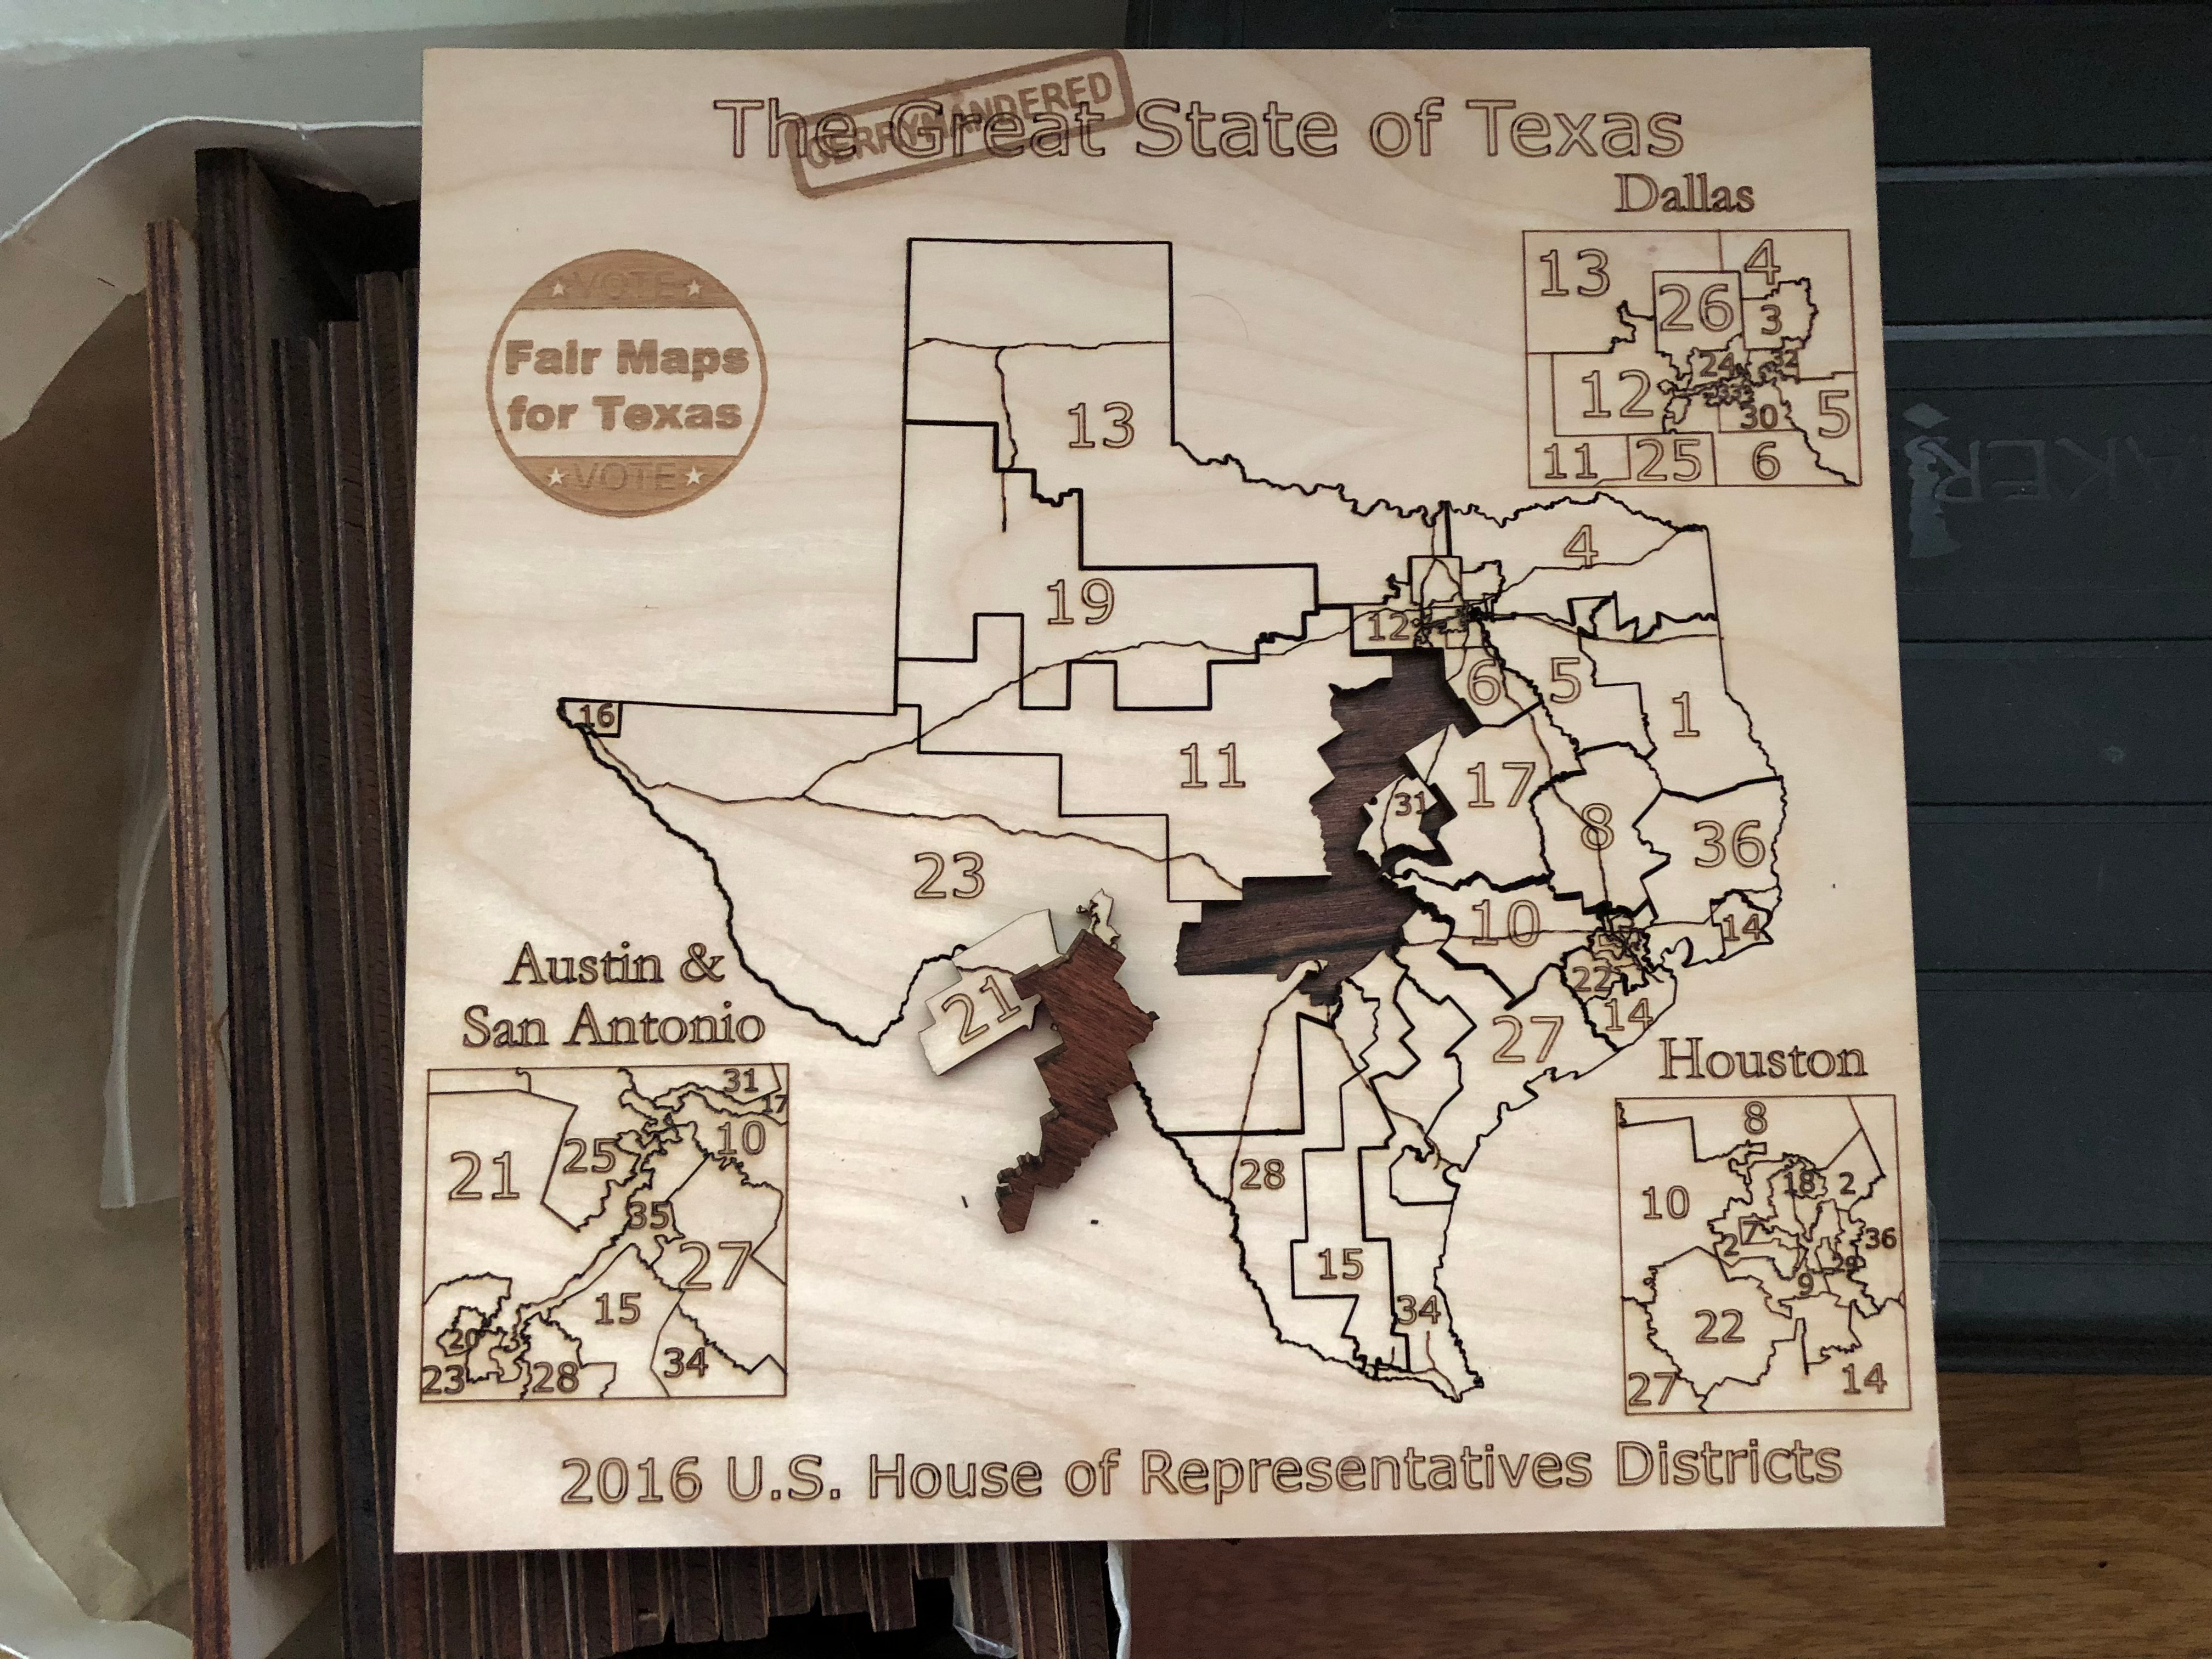 Image of the Texas jigsaw puzzle